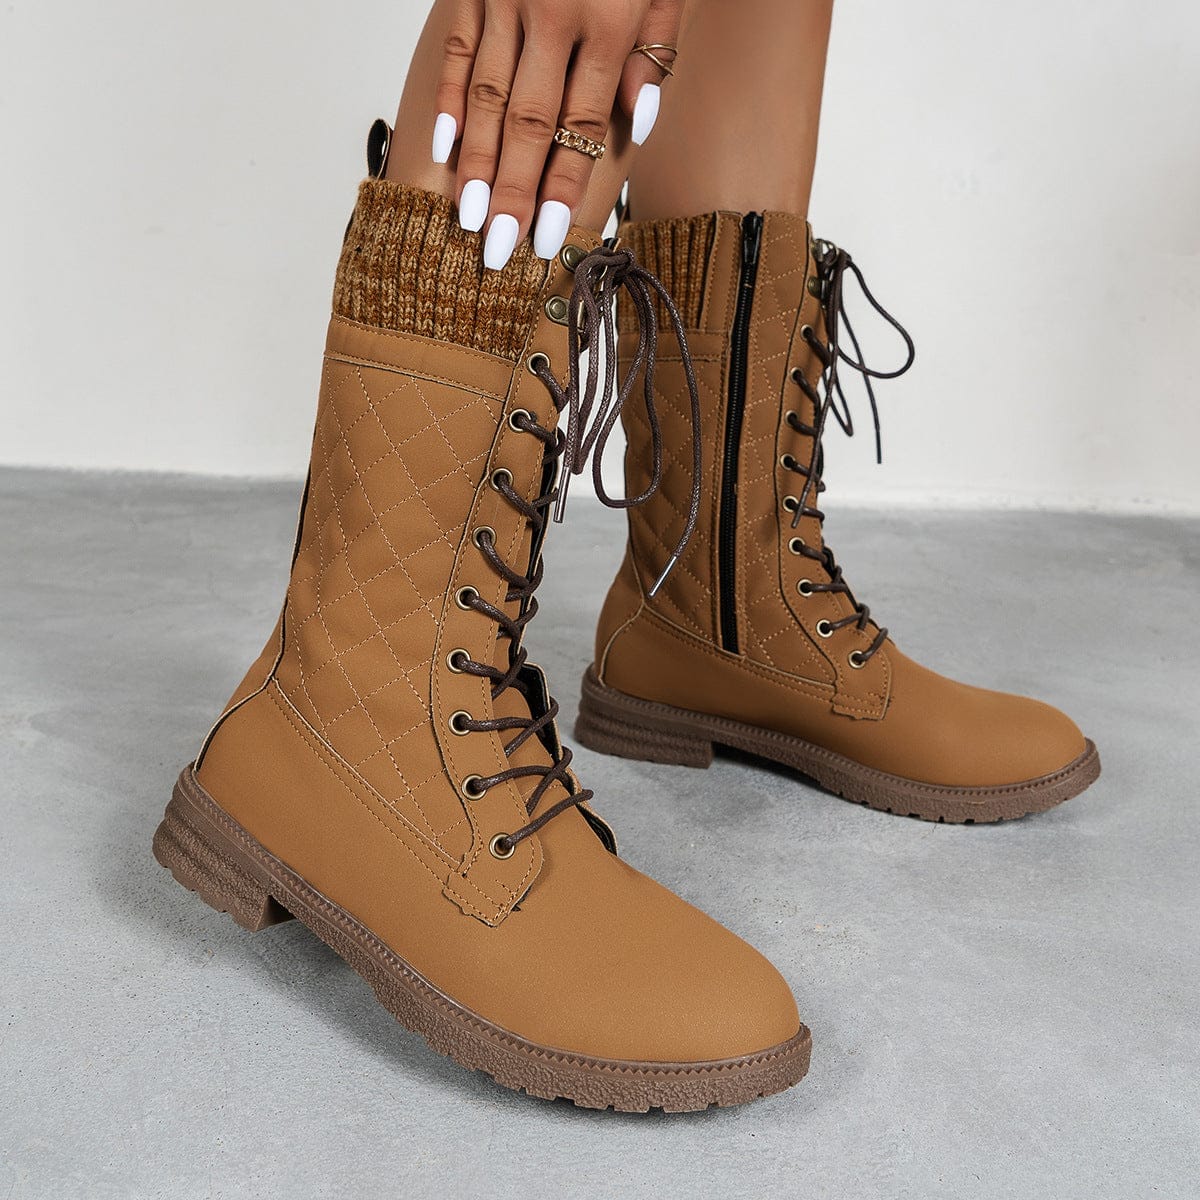 Lace Up Boots Winter Cowboy Boots Women Block Heel Round Toe Shoes BENNYS 